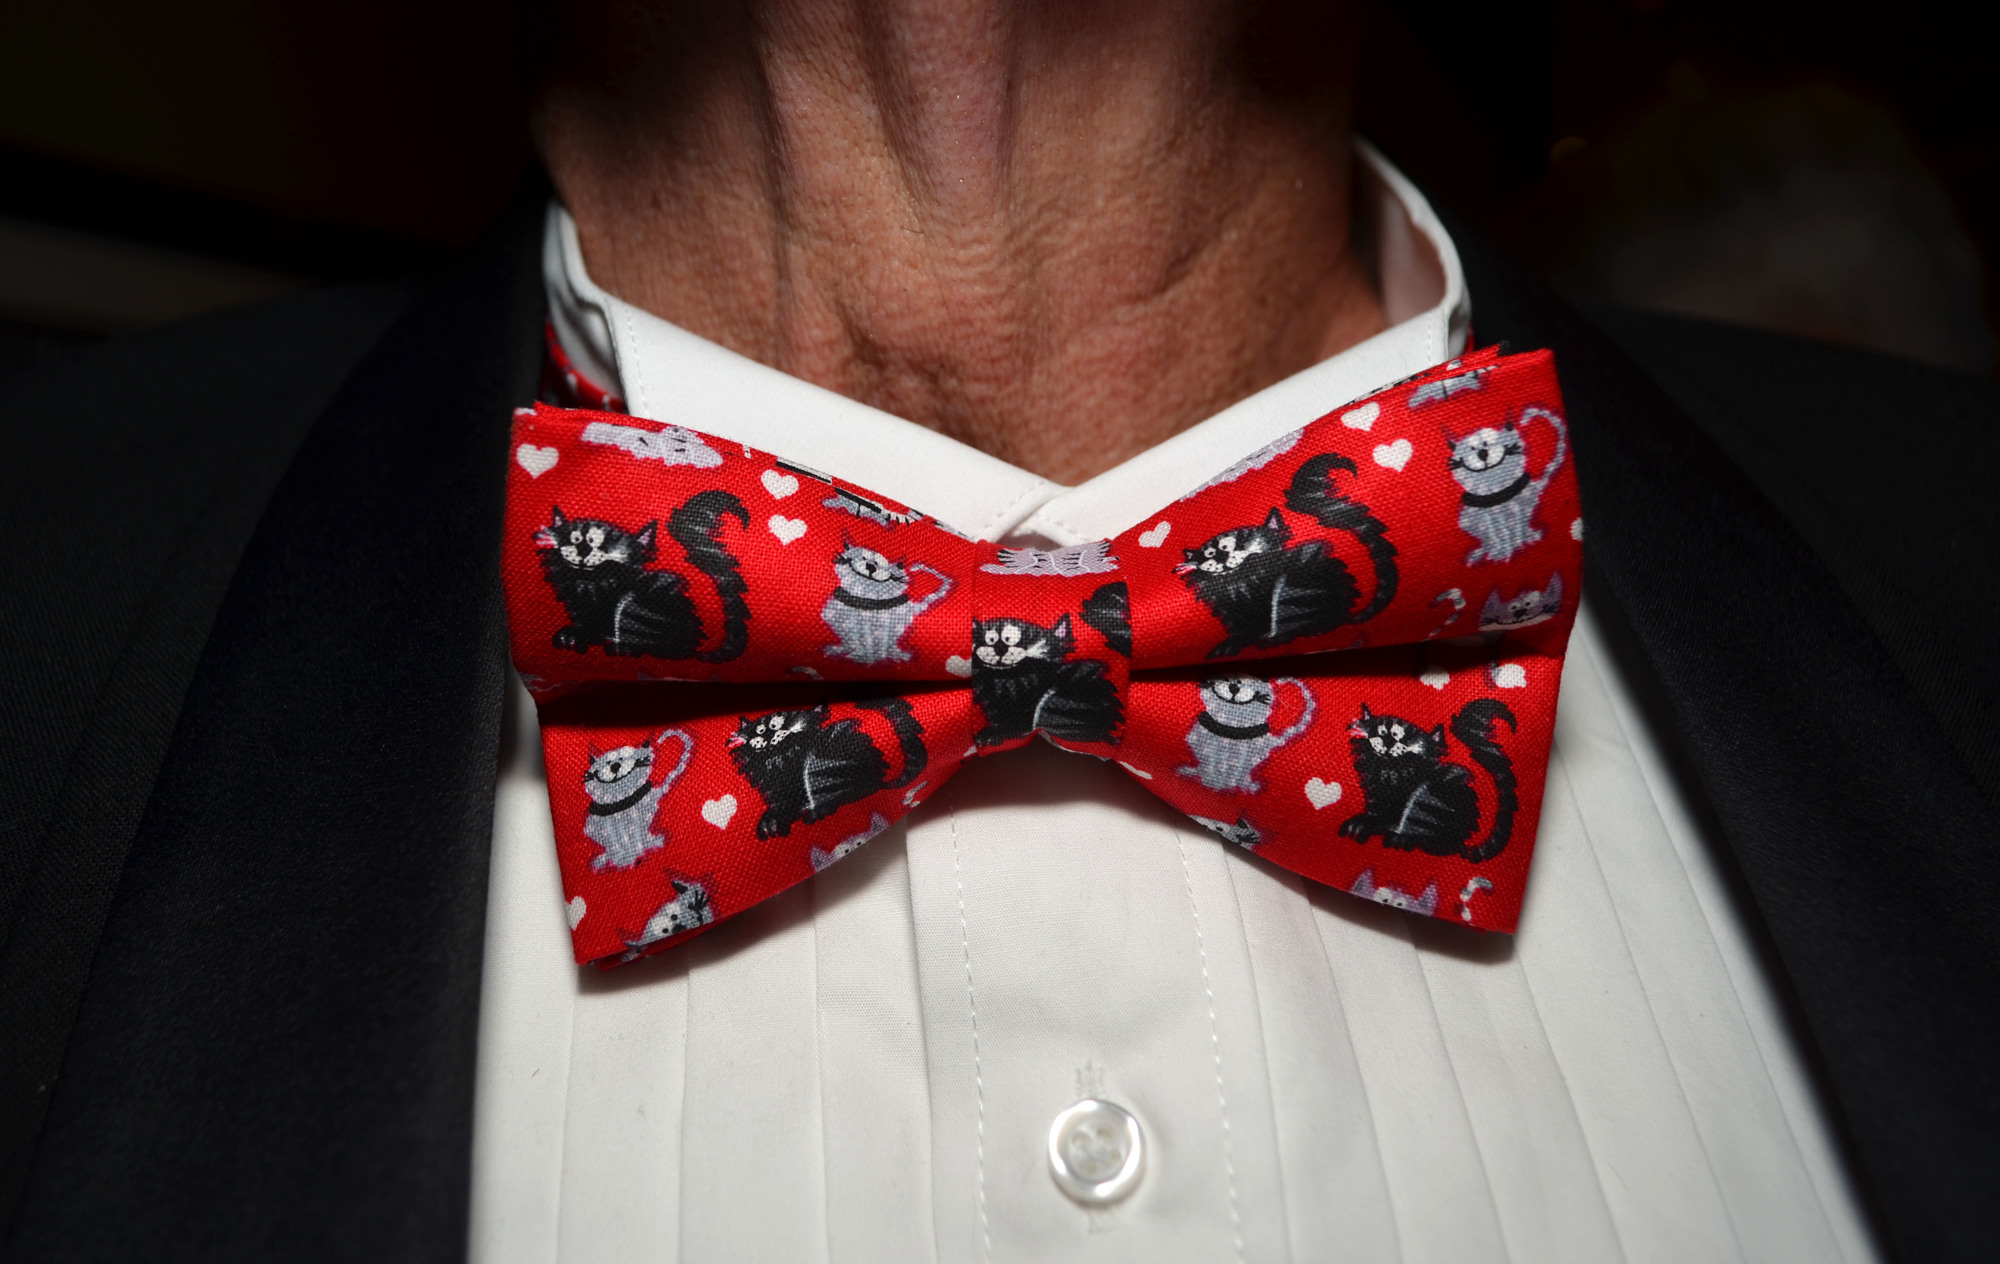 Doc Wallace found a custom bowtie on Etsy.com that he wore at the Cat Depot Gala on March 11 at Hyatt Regency Sarasota. Photo by Niki Kottmann